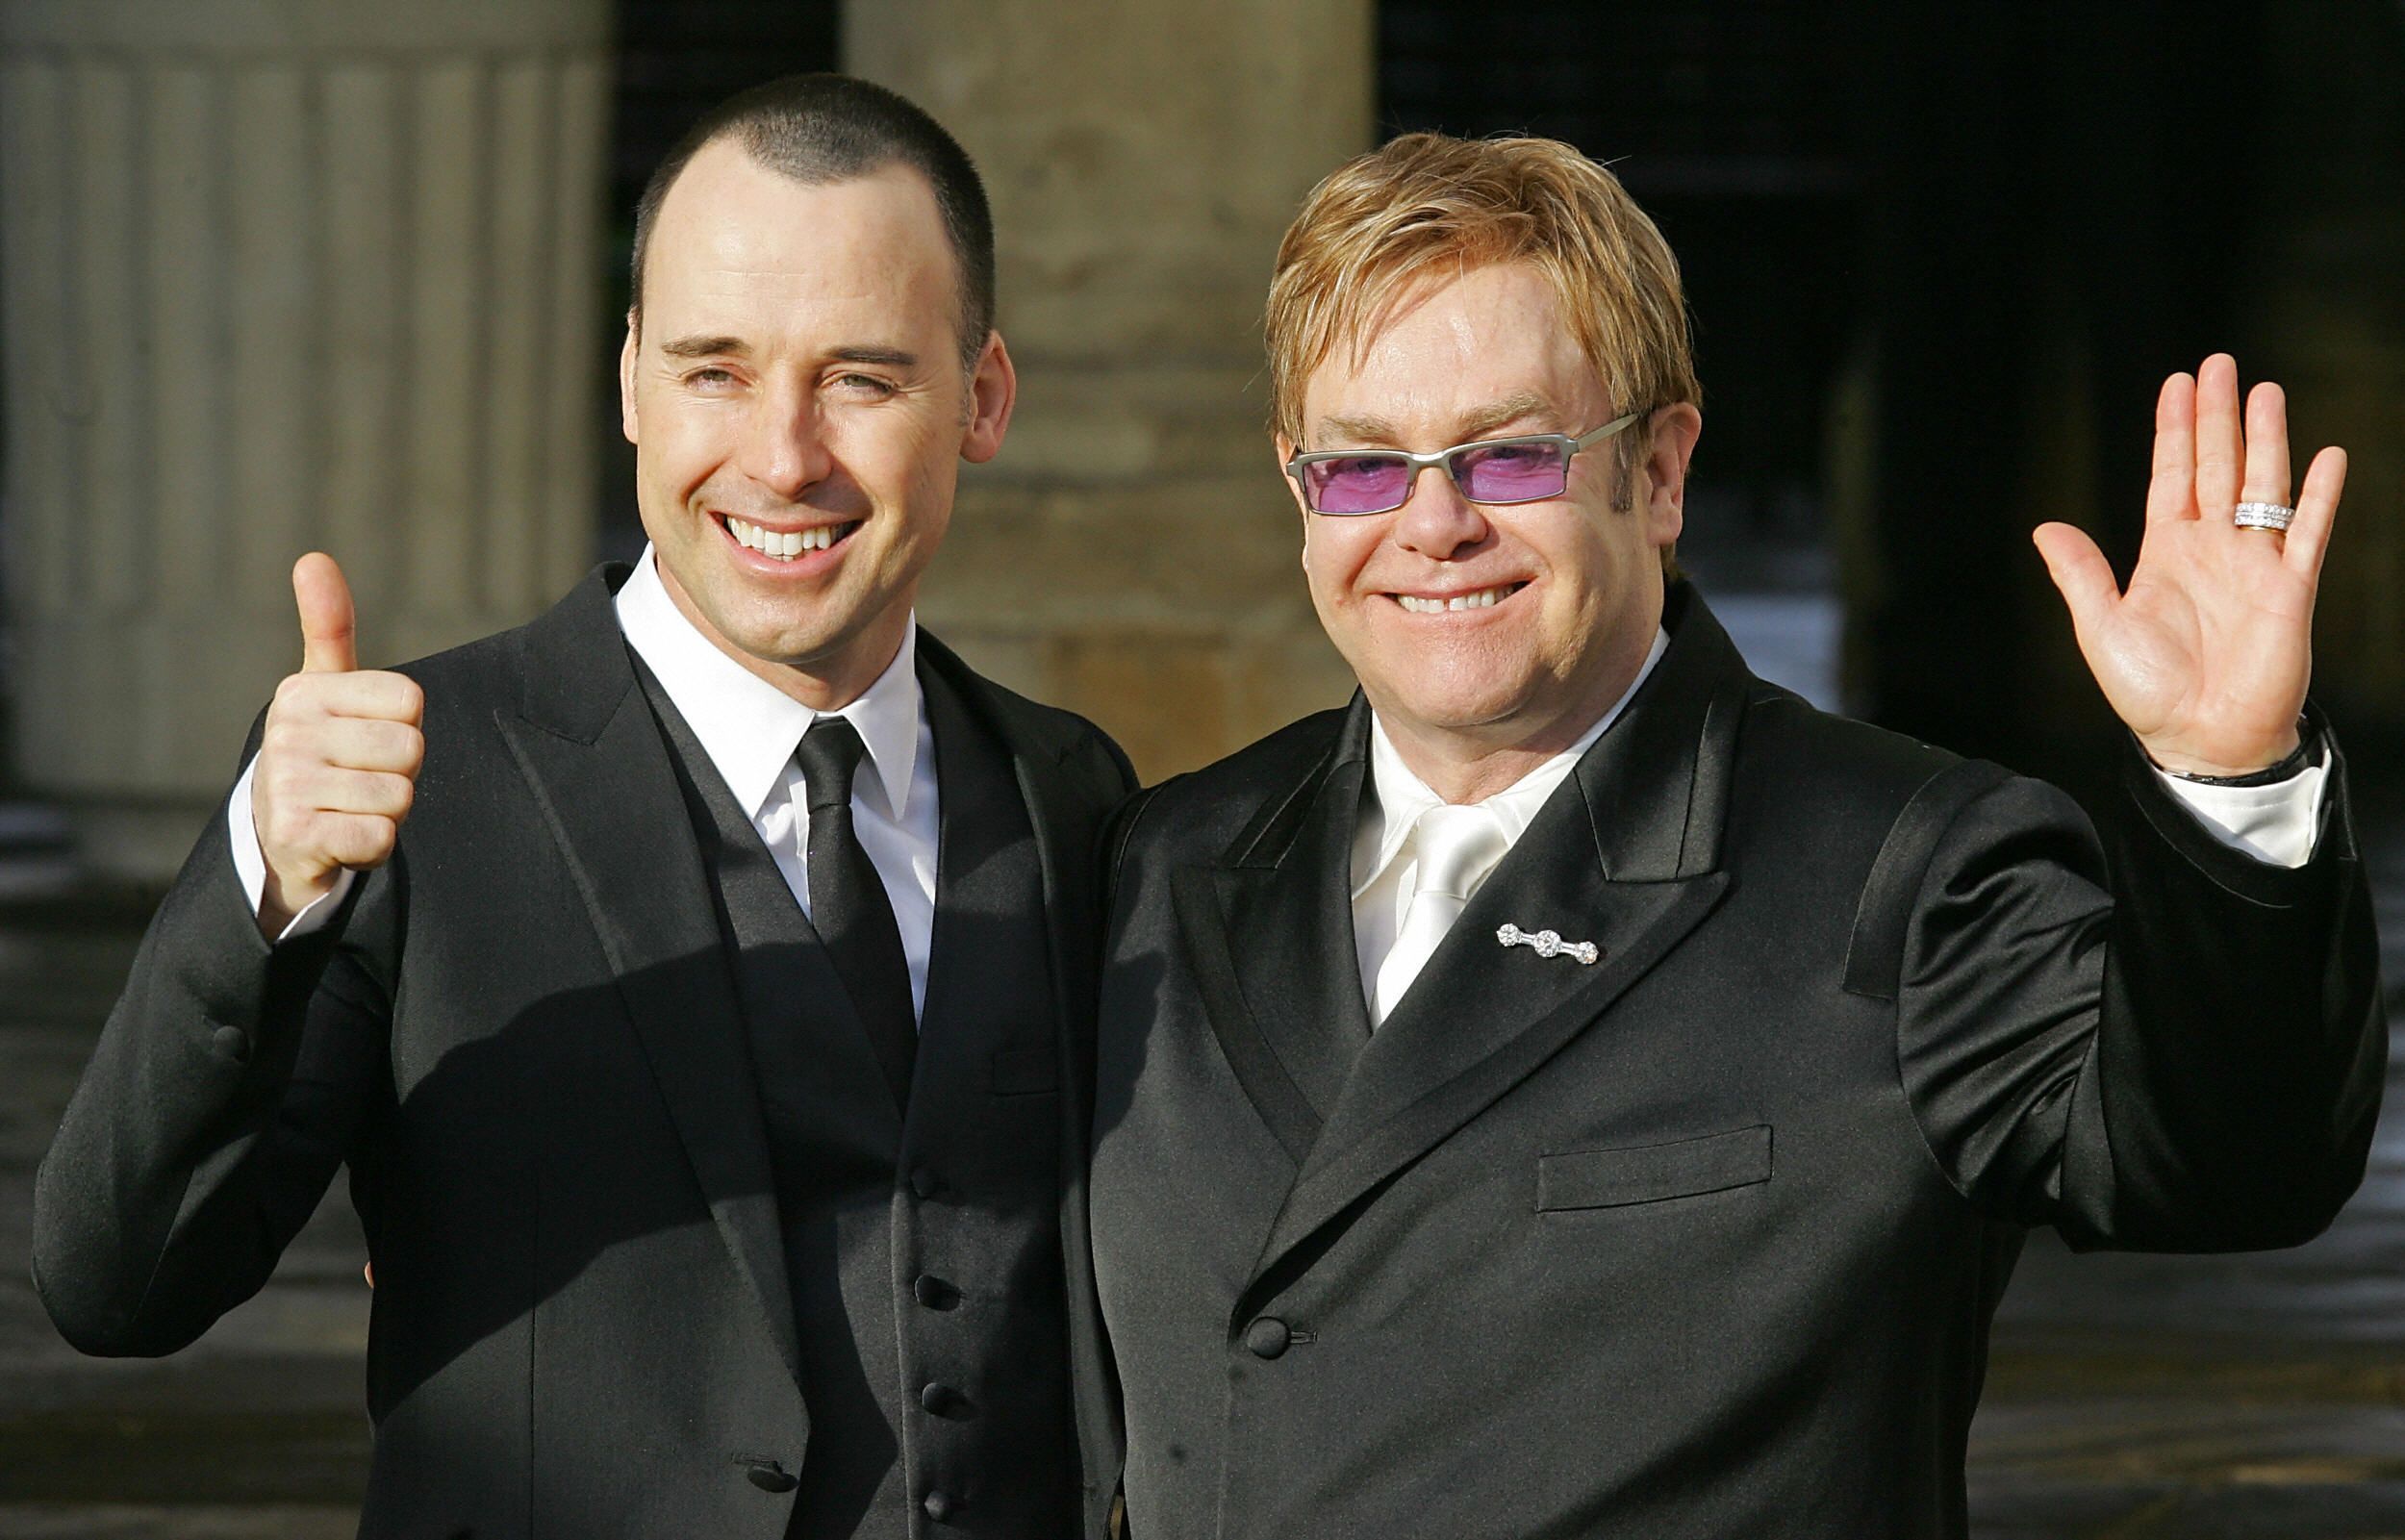 Elton John and David Furnish at the Guildhall in Windsor, December 21, 2005. | Source: Getty Images